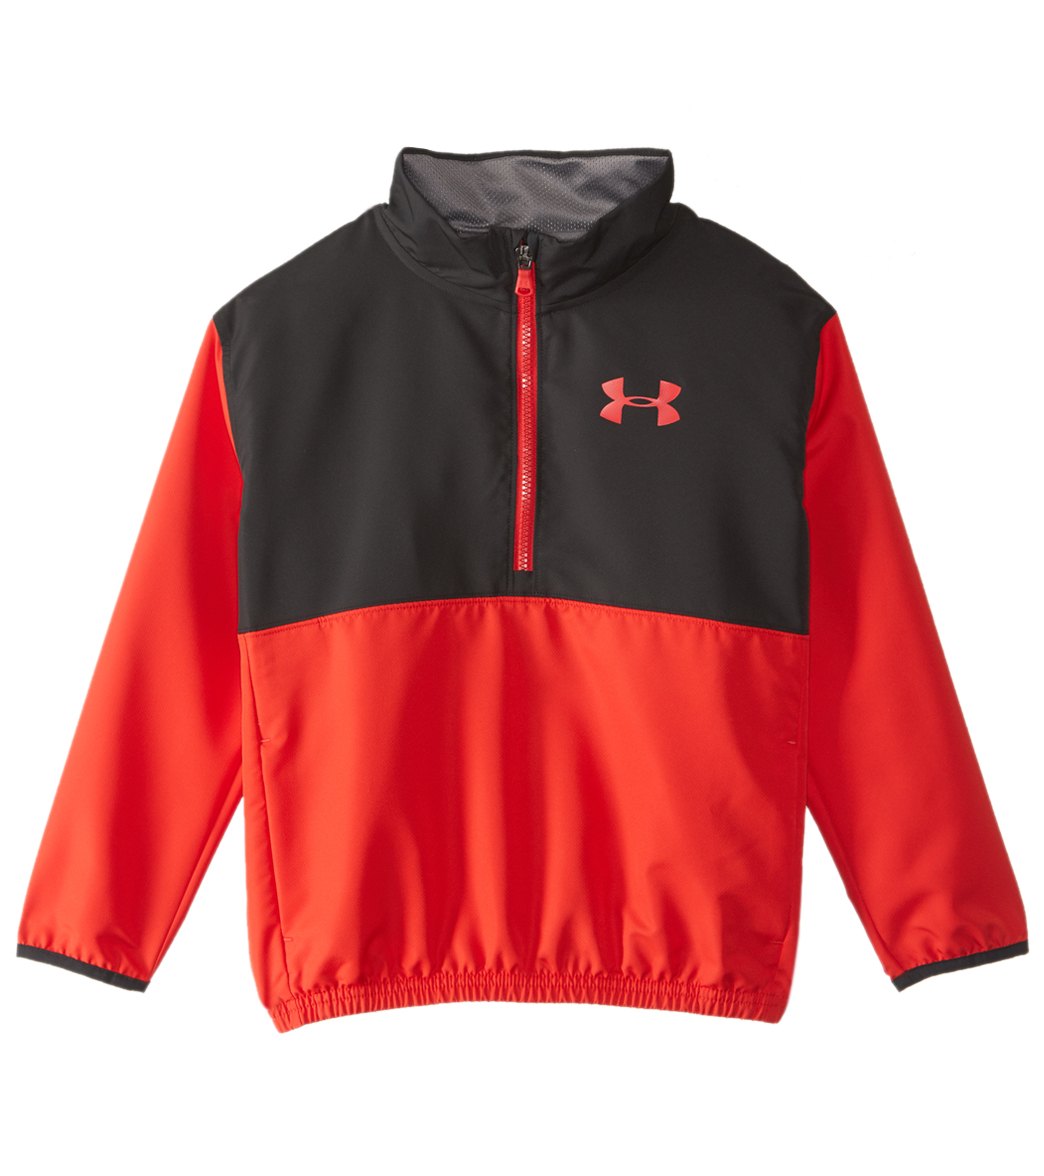 Under Armour Boys' Train to Game Jacket 